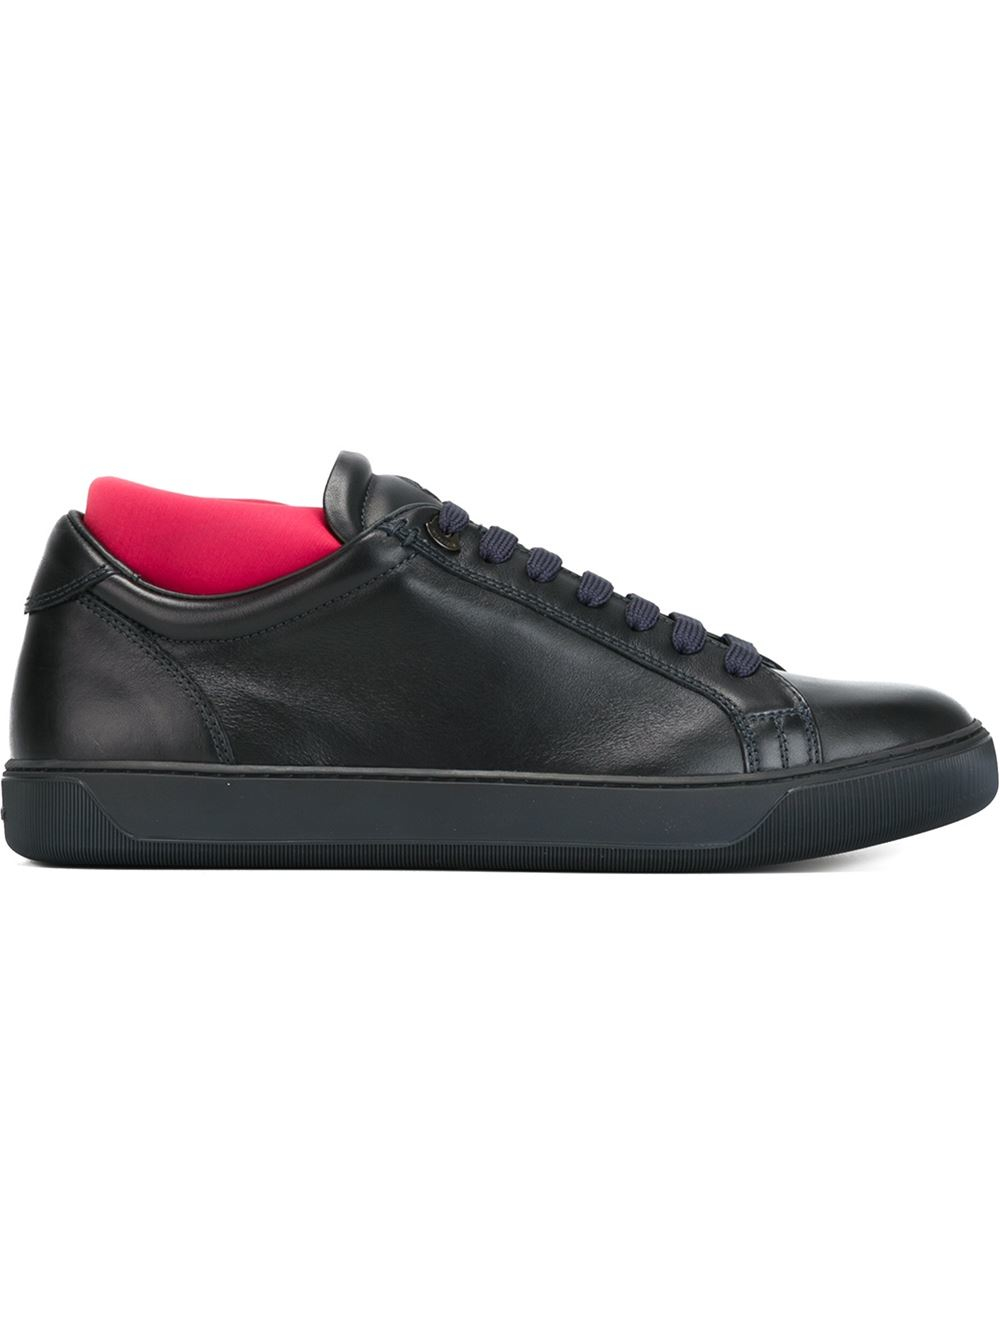 Lyst - Moncler 'goure' Sneakers in Blue for Men